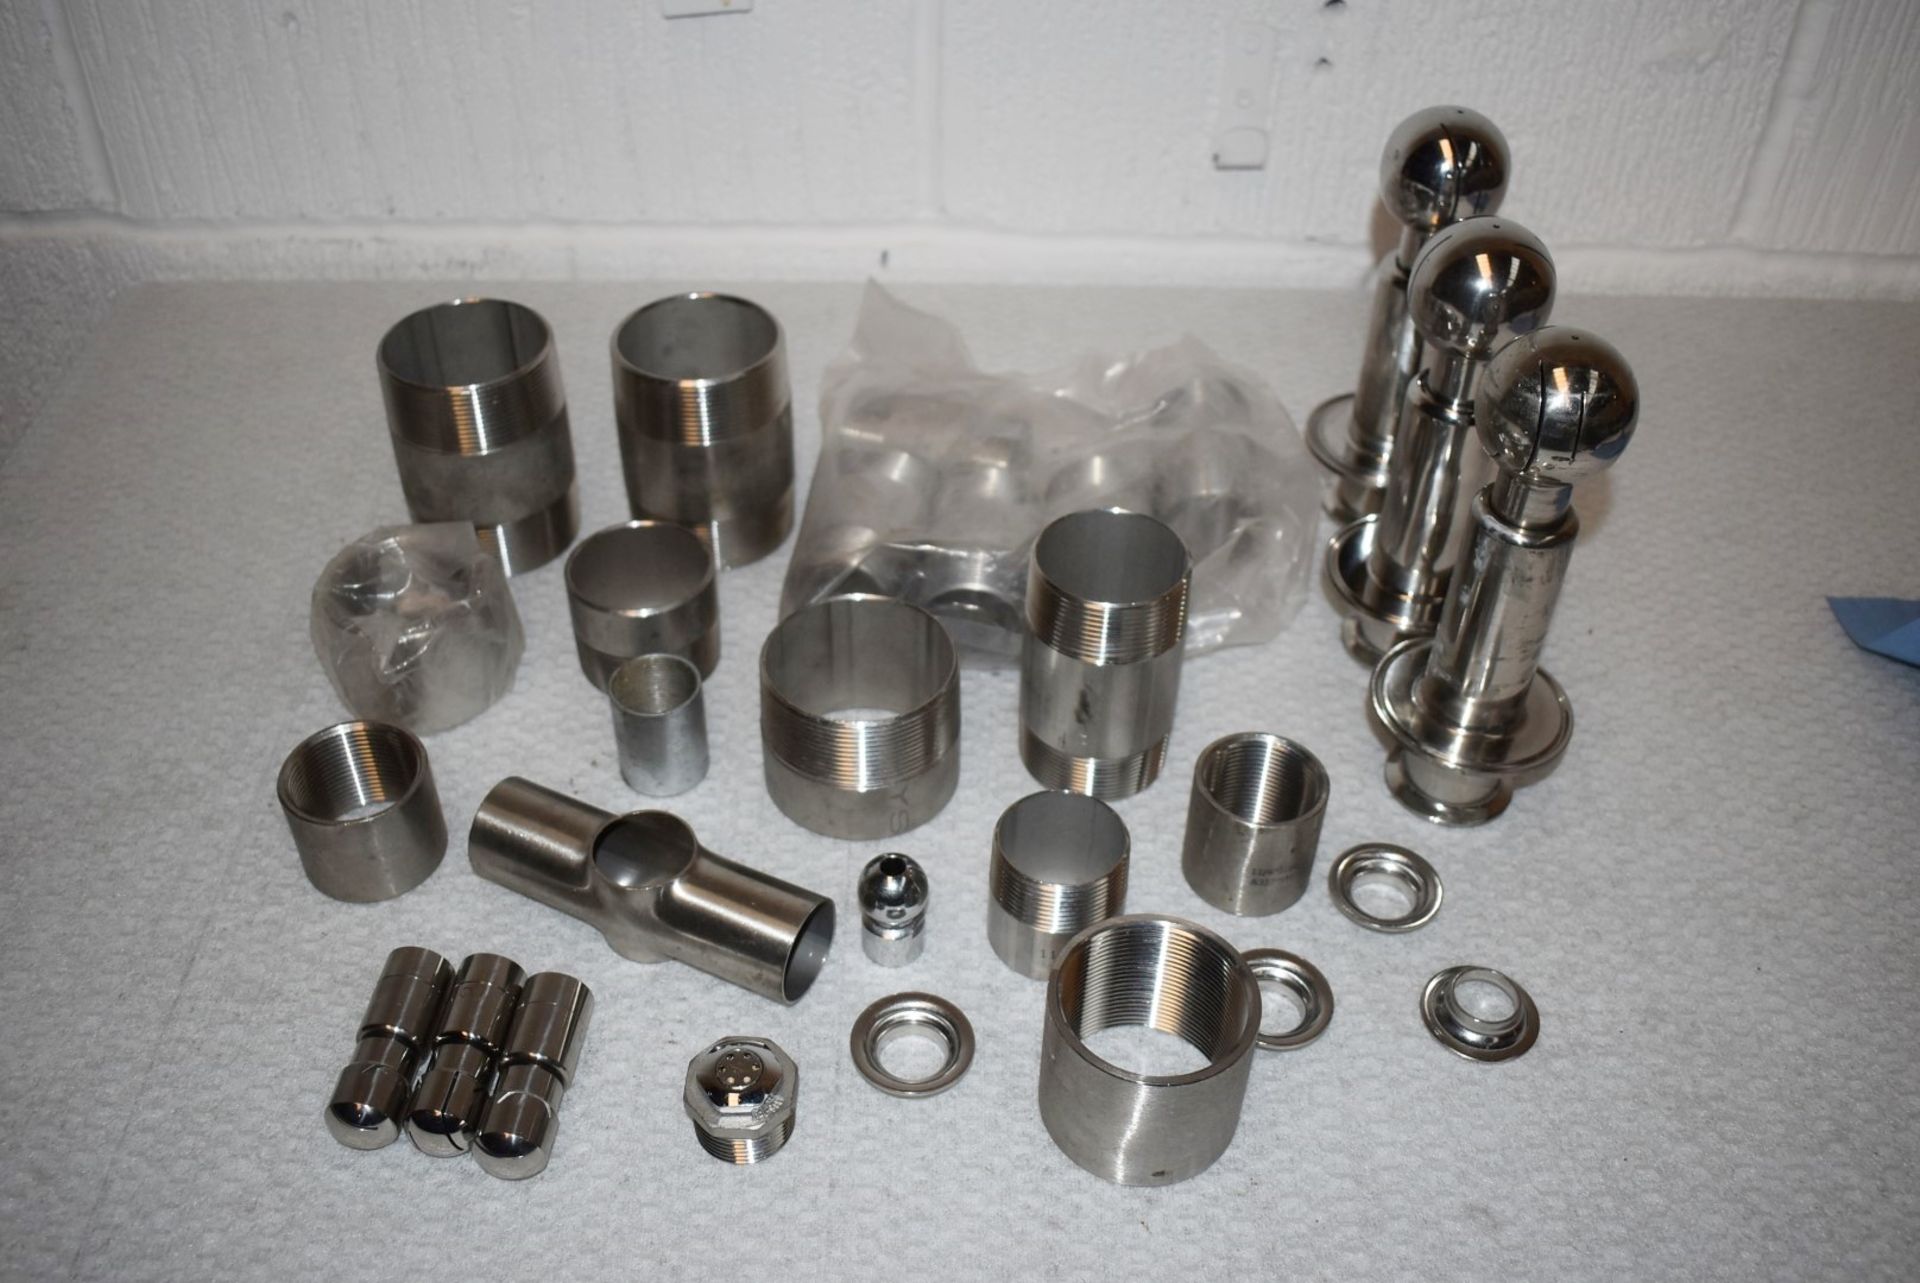 Assorted Job Lot of Stainless Steel Fittings For Brewery Equipment - Includes Approx 30 Pieces - - Image 2 of 10